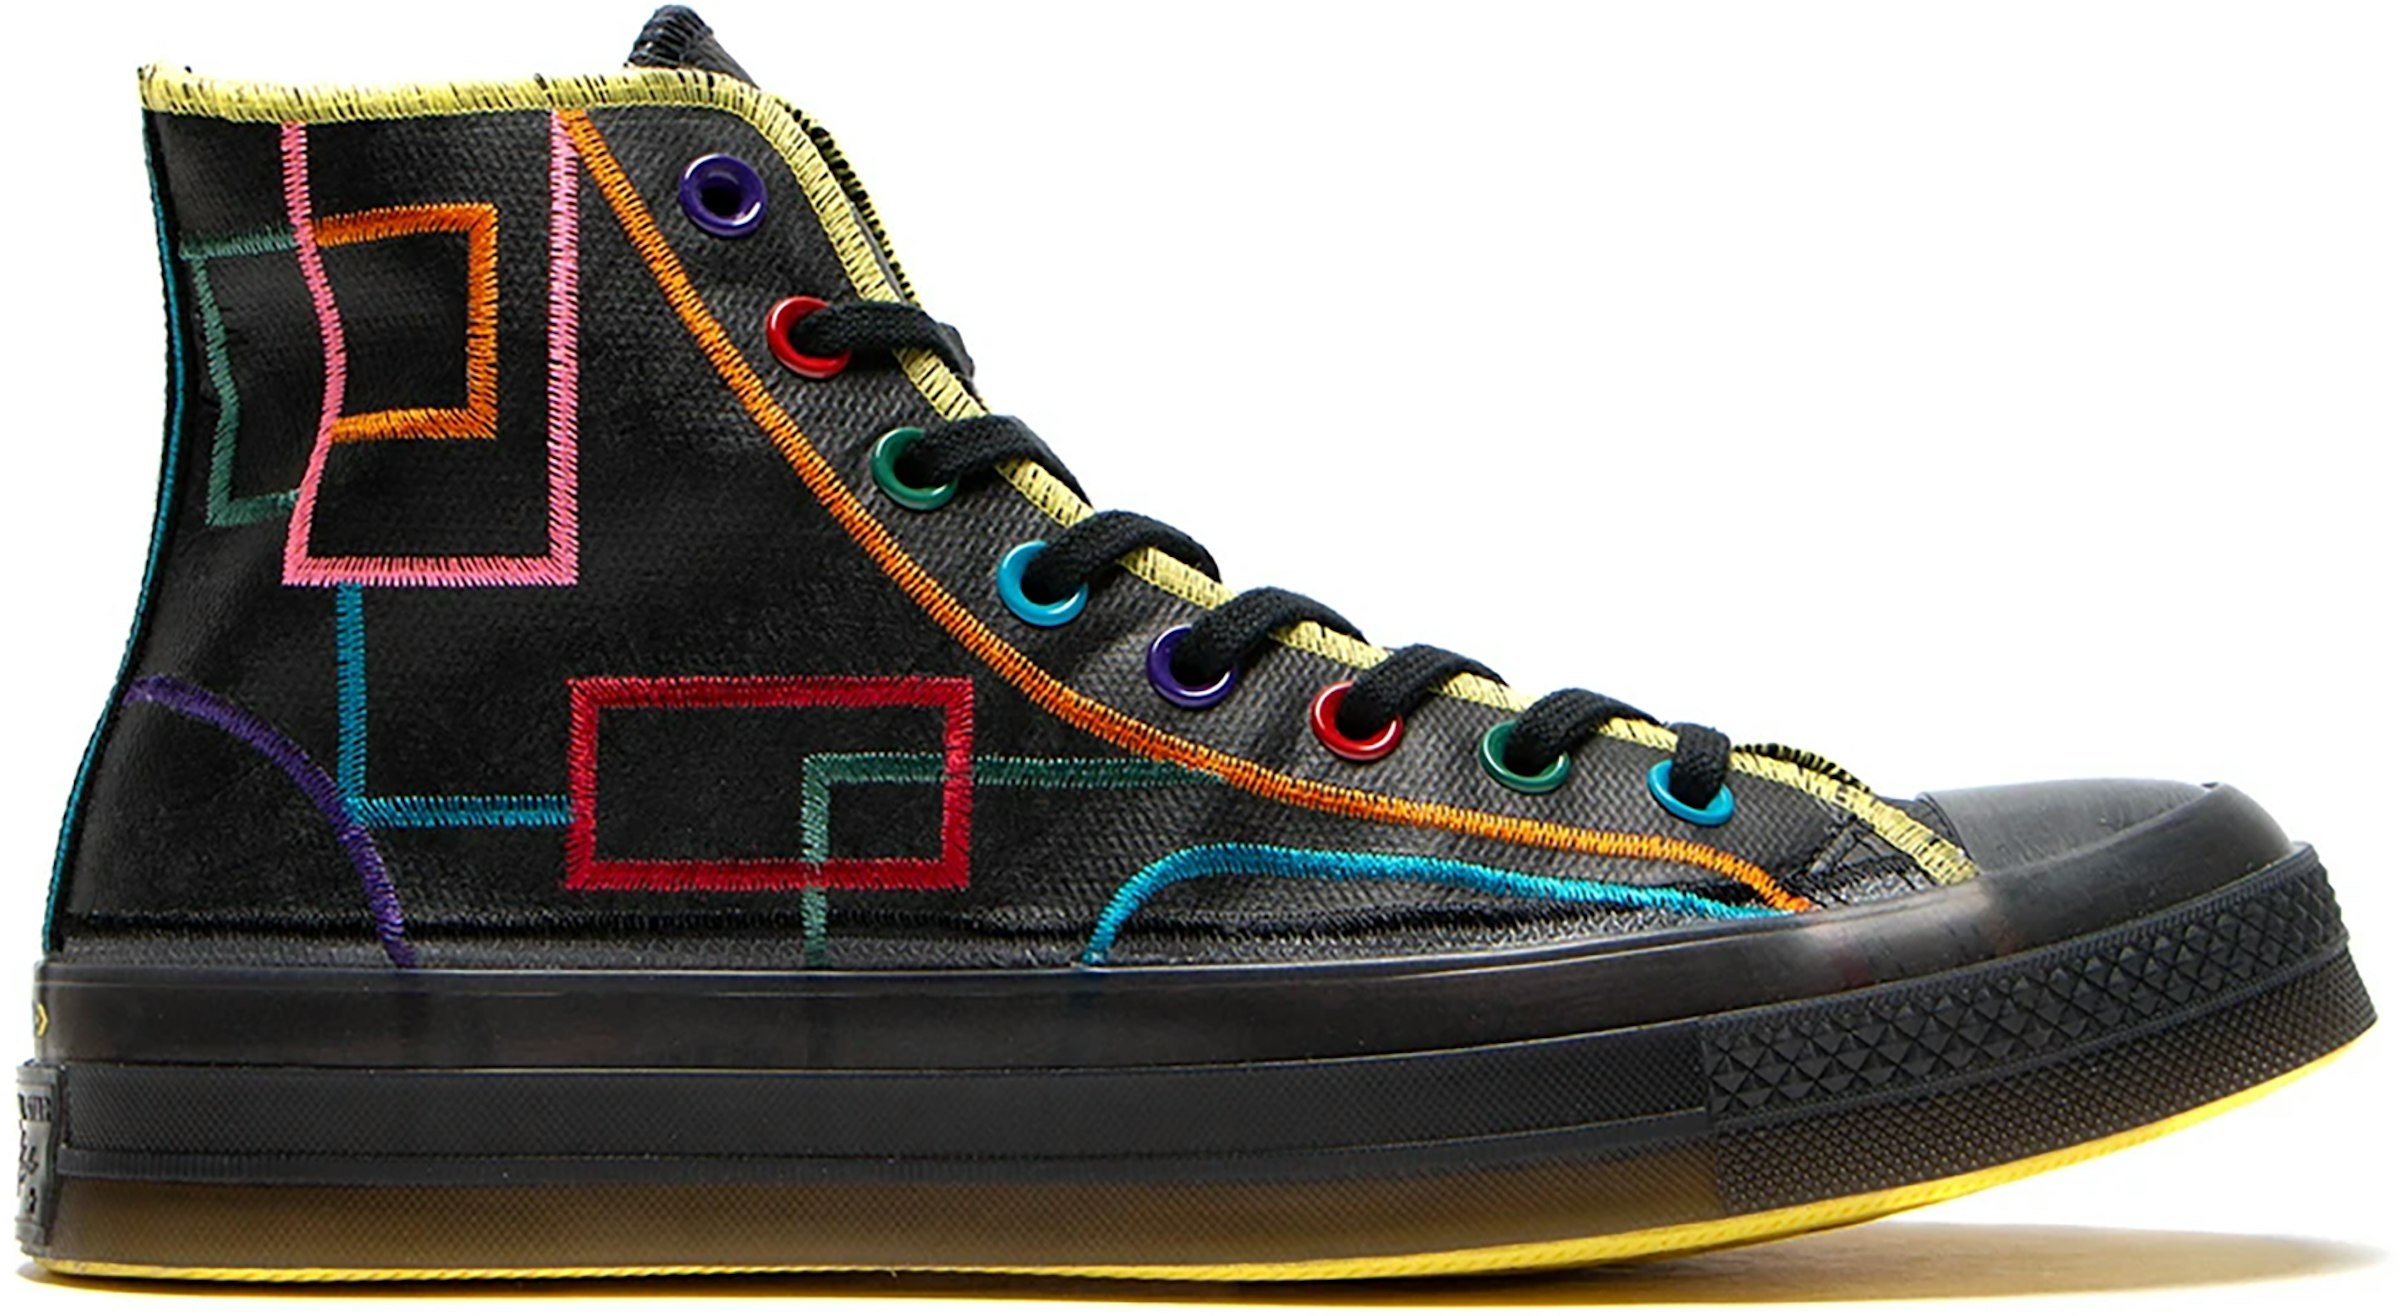 Imperial Limón Abrazadera Converse Chuck Taylor All-Star 70 Hi Chinese New Year (2020) Men's -  167330C - US